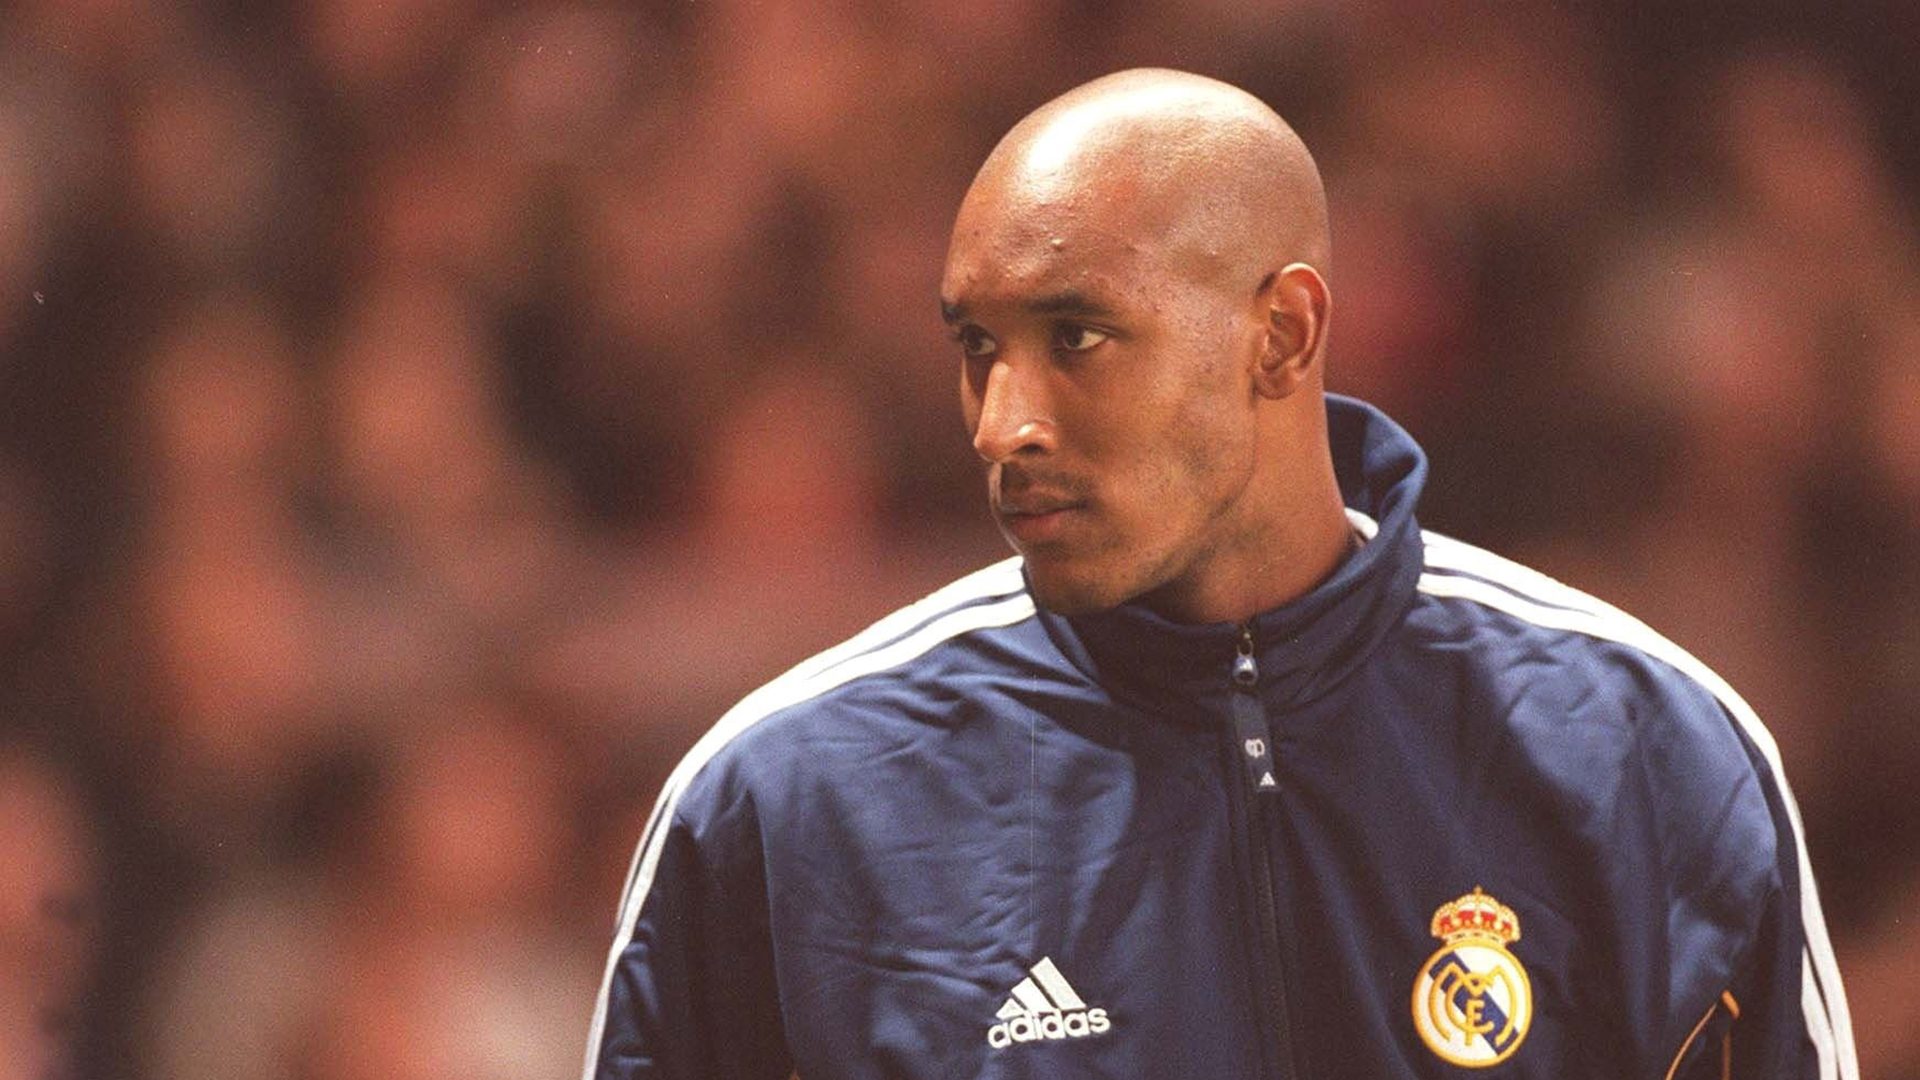 Anelka reveals he 'hated it' at Real Madrid and wanted to stay at Liverpool